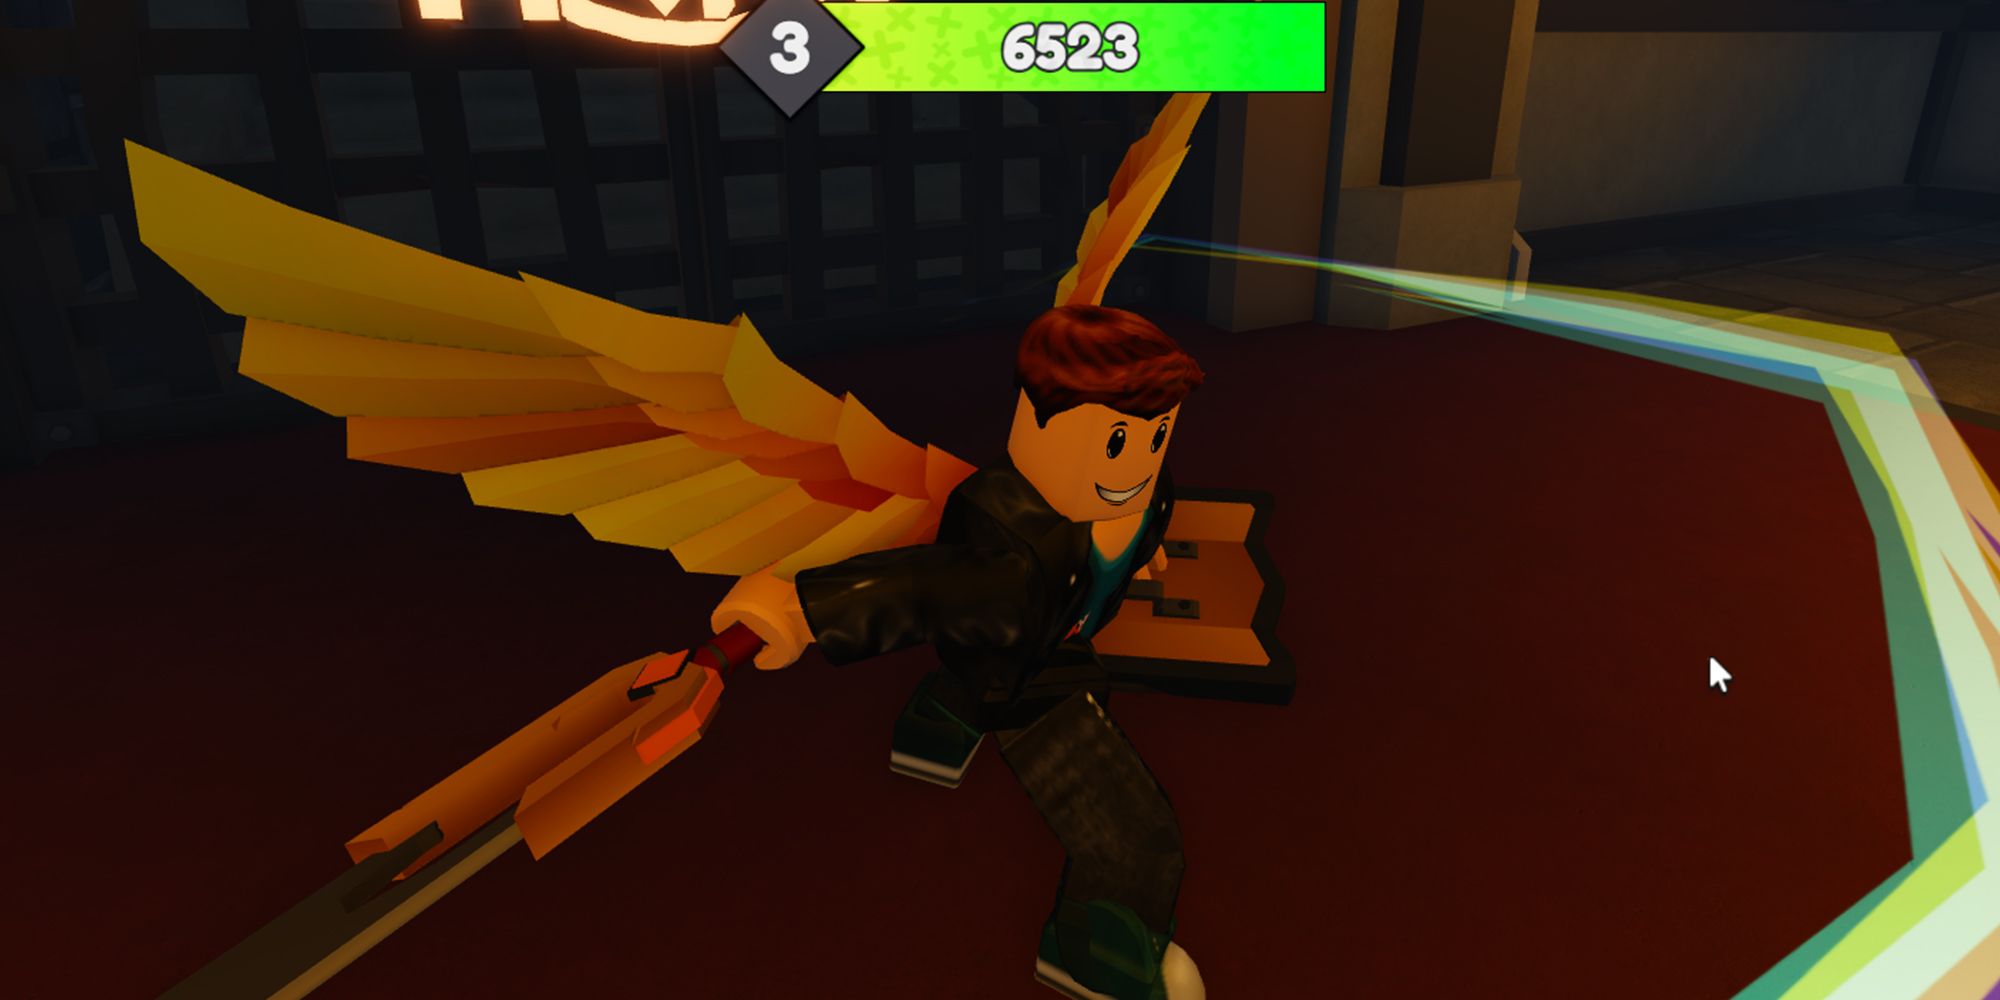 A winged hero fights through a dungeon in the Roblox game Chest Hero Simulator.